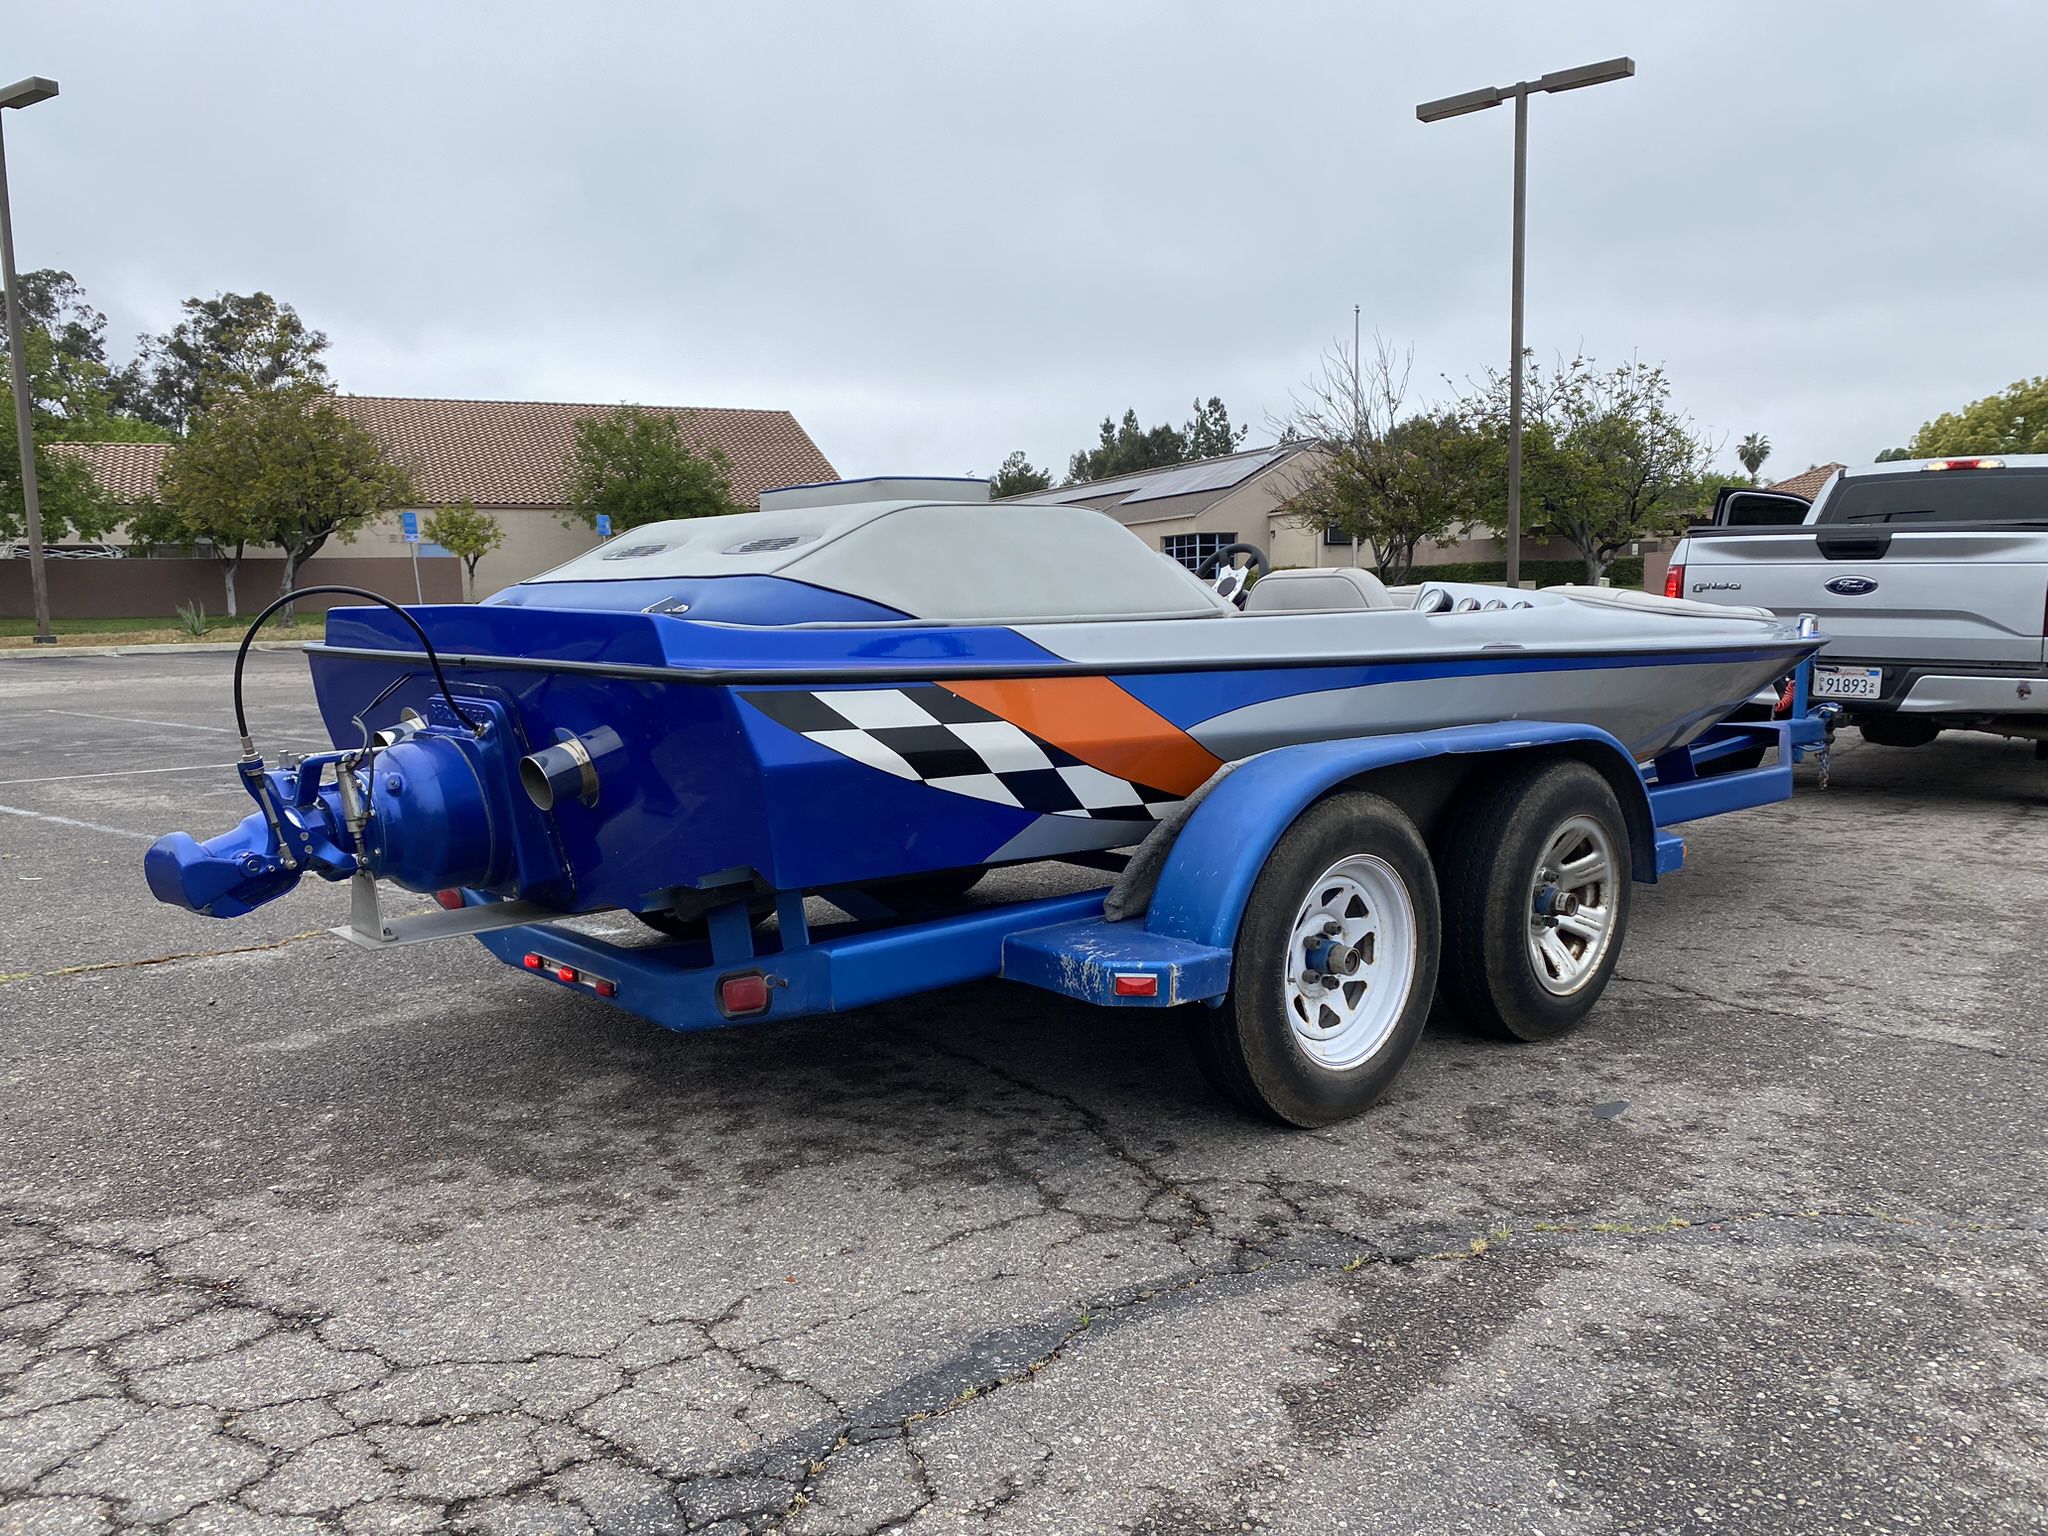 1986 Carrera Eclipse 21 Ft Open Bow Jet Boat 